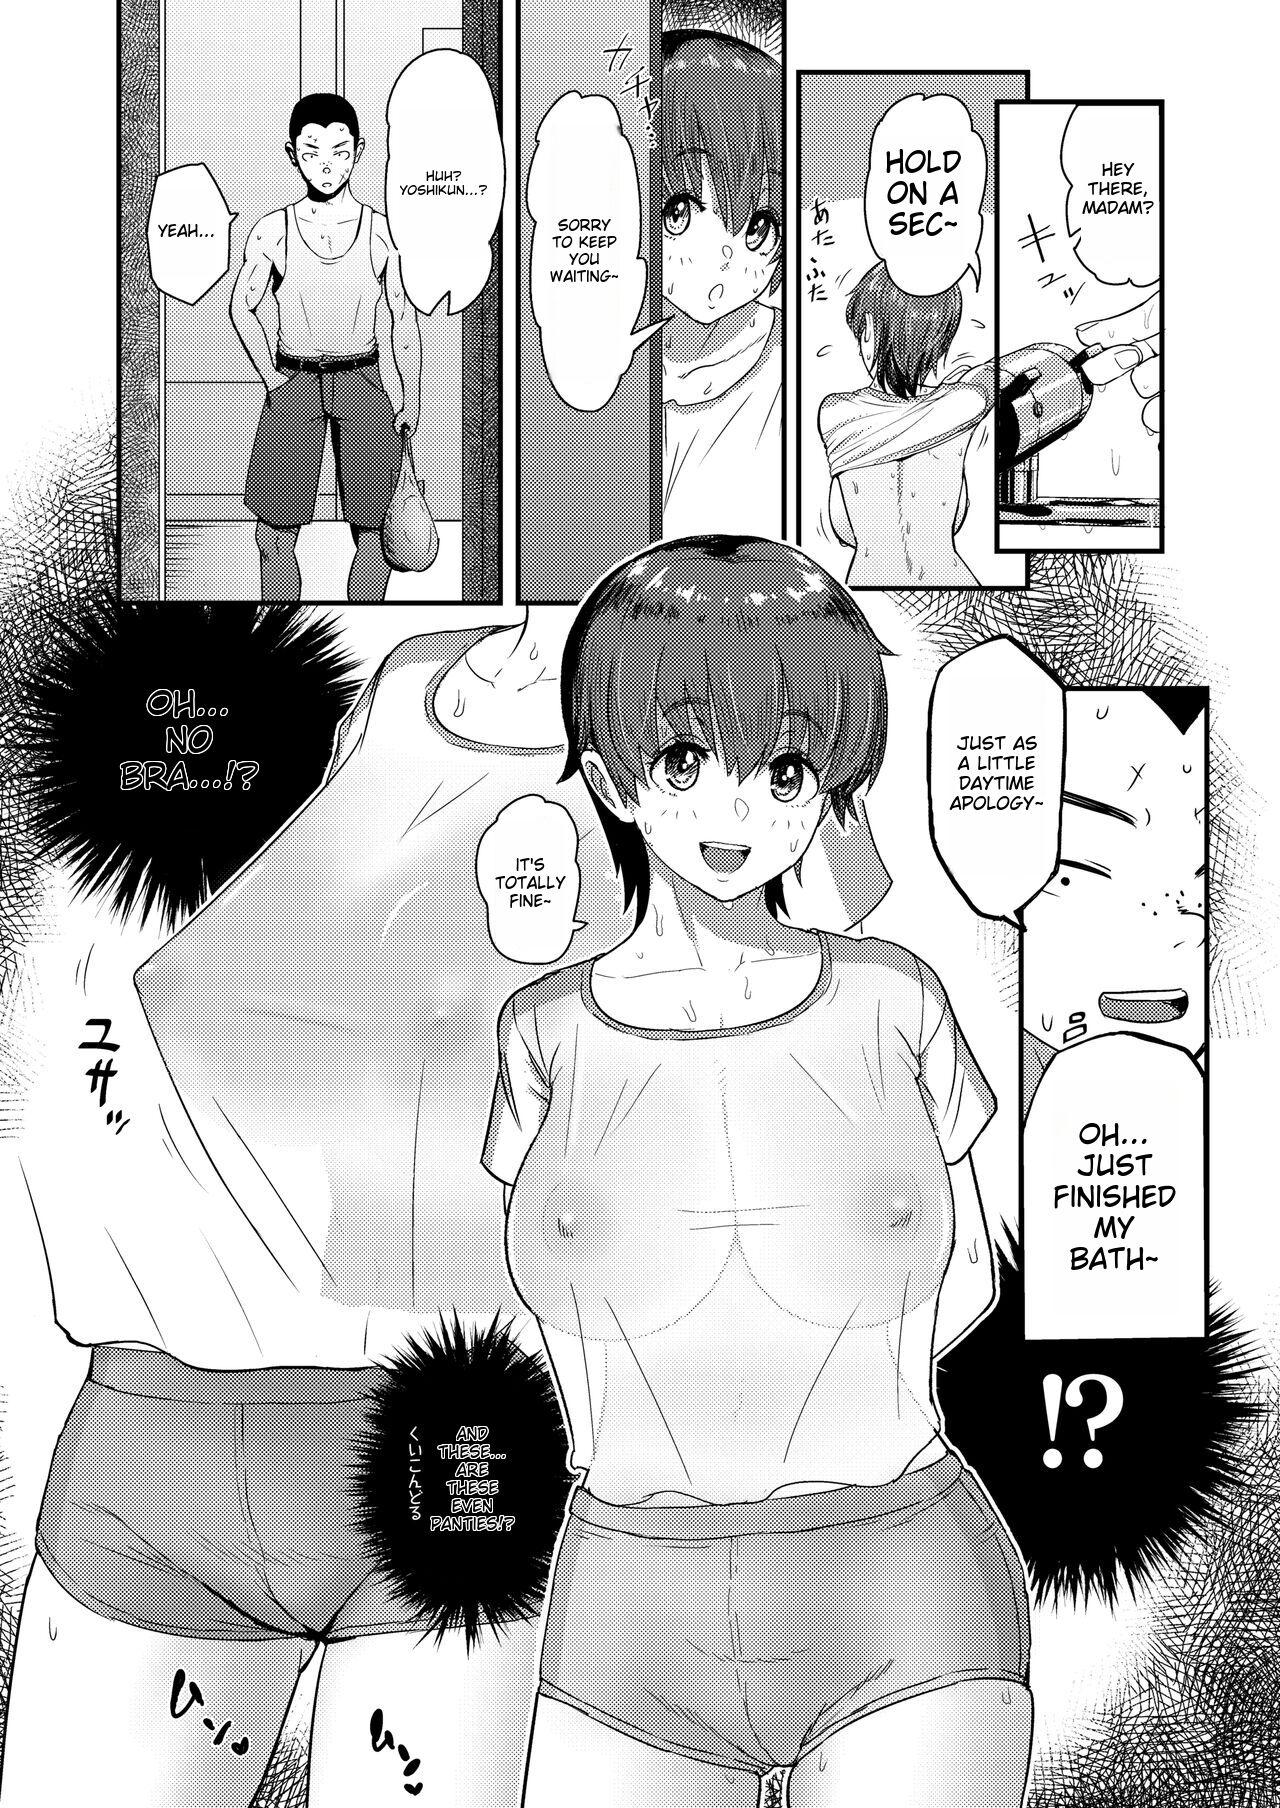 Family Mamami no Kuse ni! | Even In The Countryside, Being Busty Is Not A Problem, I Tell Ya! Yanks Featured - Page 8